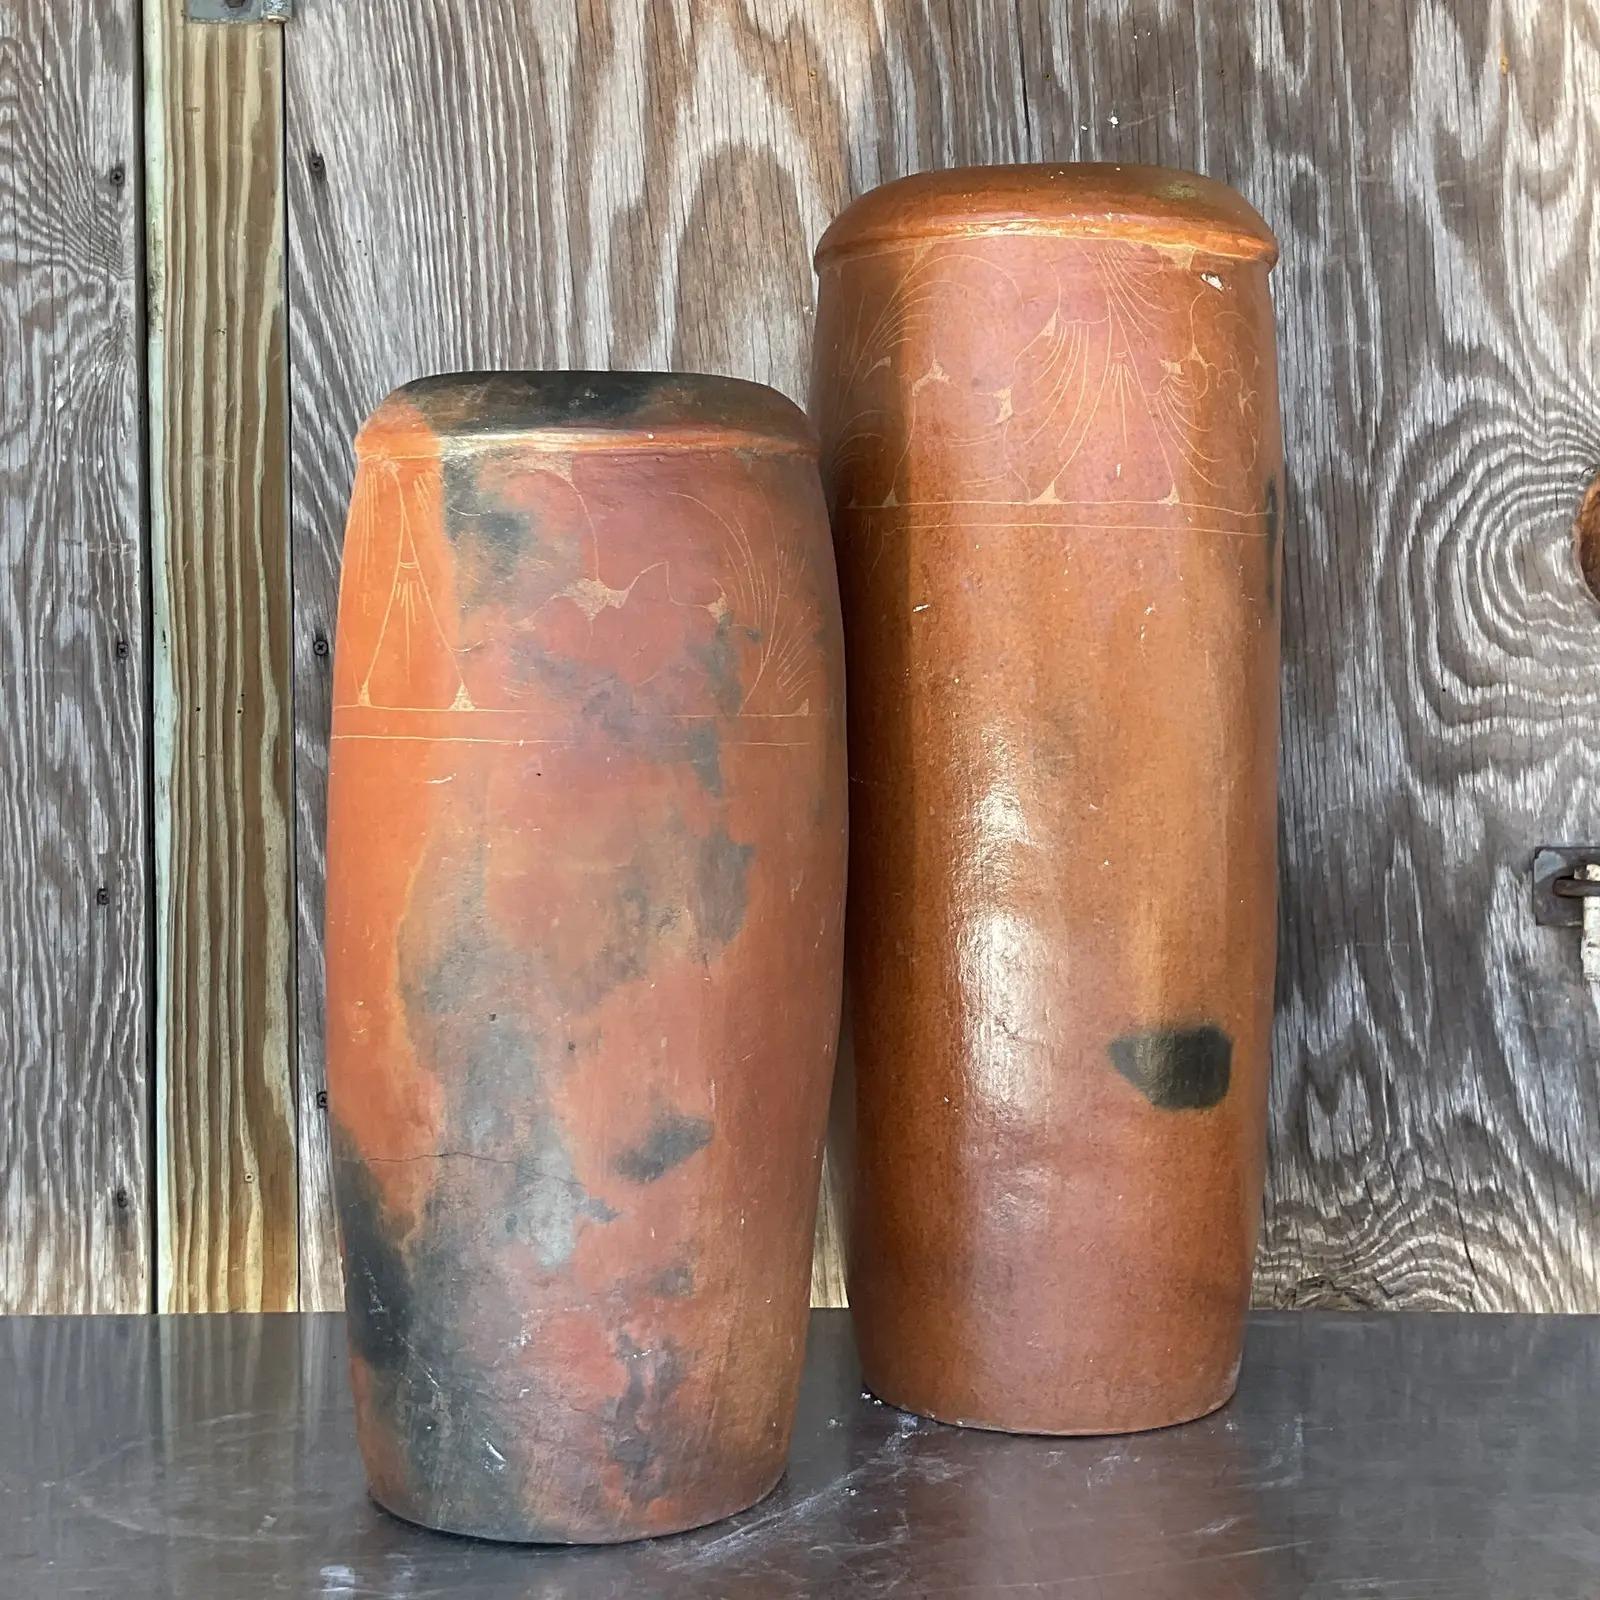 A n incredible set of two vintage Boho vases. Beautiful terracotta construction with rings of fine etched detail. Gorgeous display of fiery colors. Acquired from a Palm Beach estate.

Second vase 8 x 8 x 19.5.